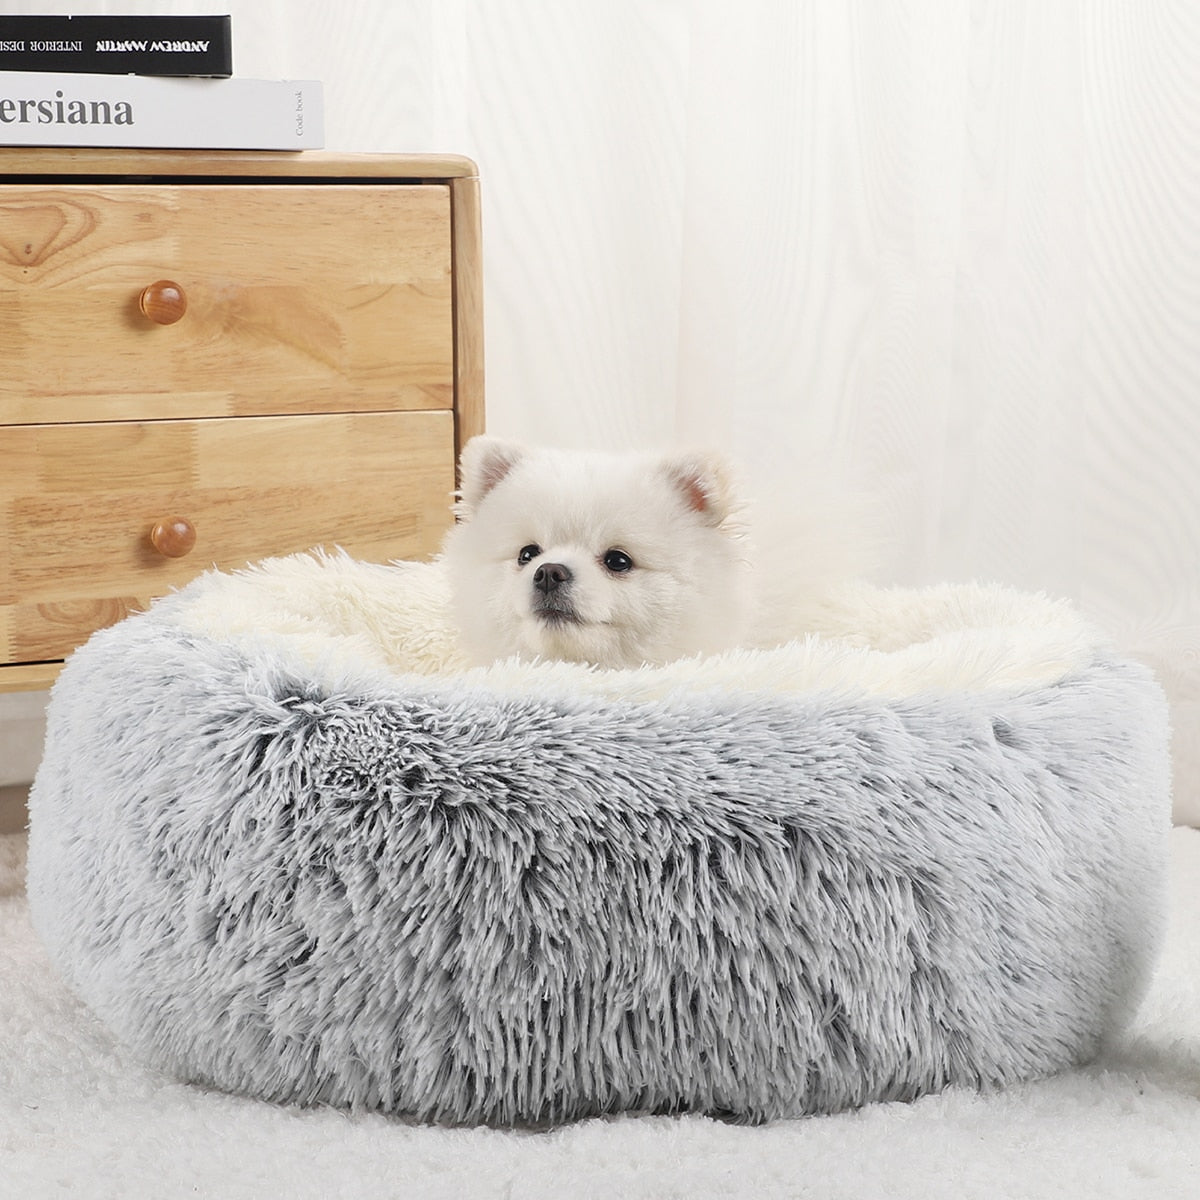 Pet Bed Fluffy Dog Plush Beds for Dogs Medium Warm Accessories Large Accessory &amp; Furniture Puppy Small Sofa Kennel Washable Cats